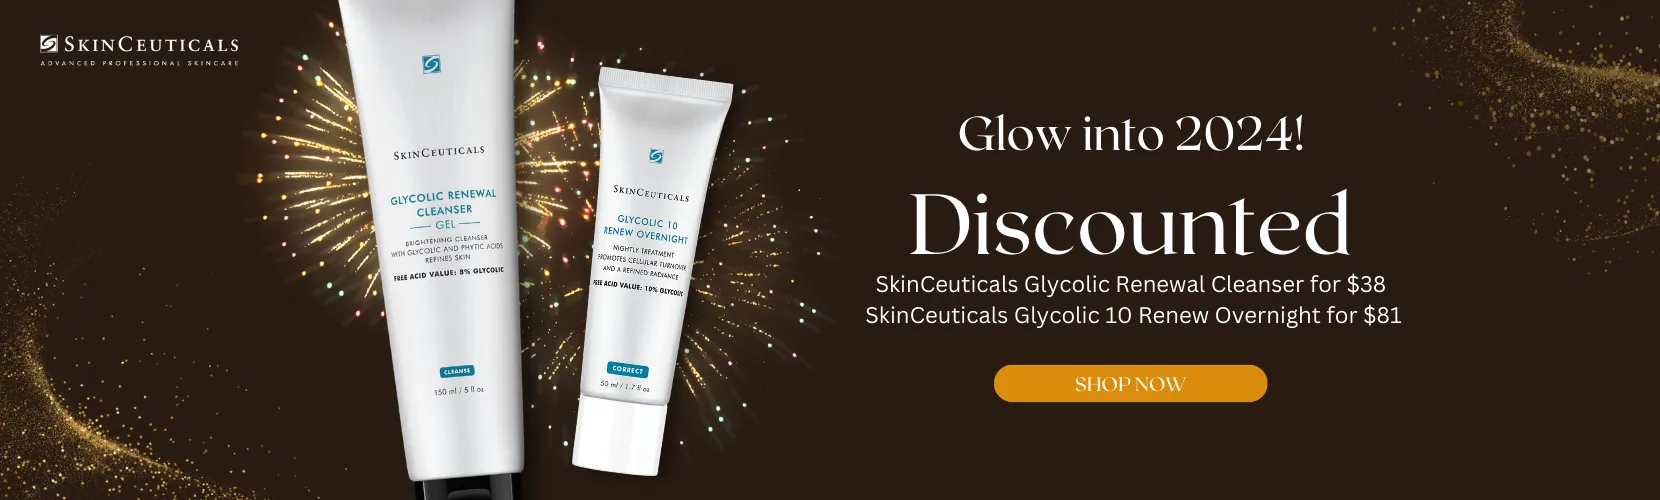 Glow into 2024 with Glycolic 10 Renew Overnight and Glycolic Cleanser